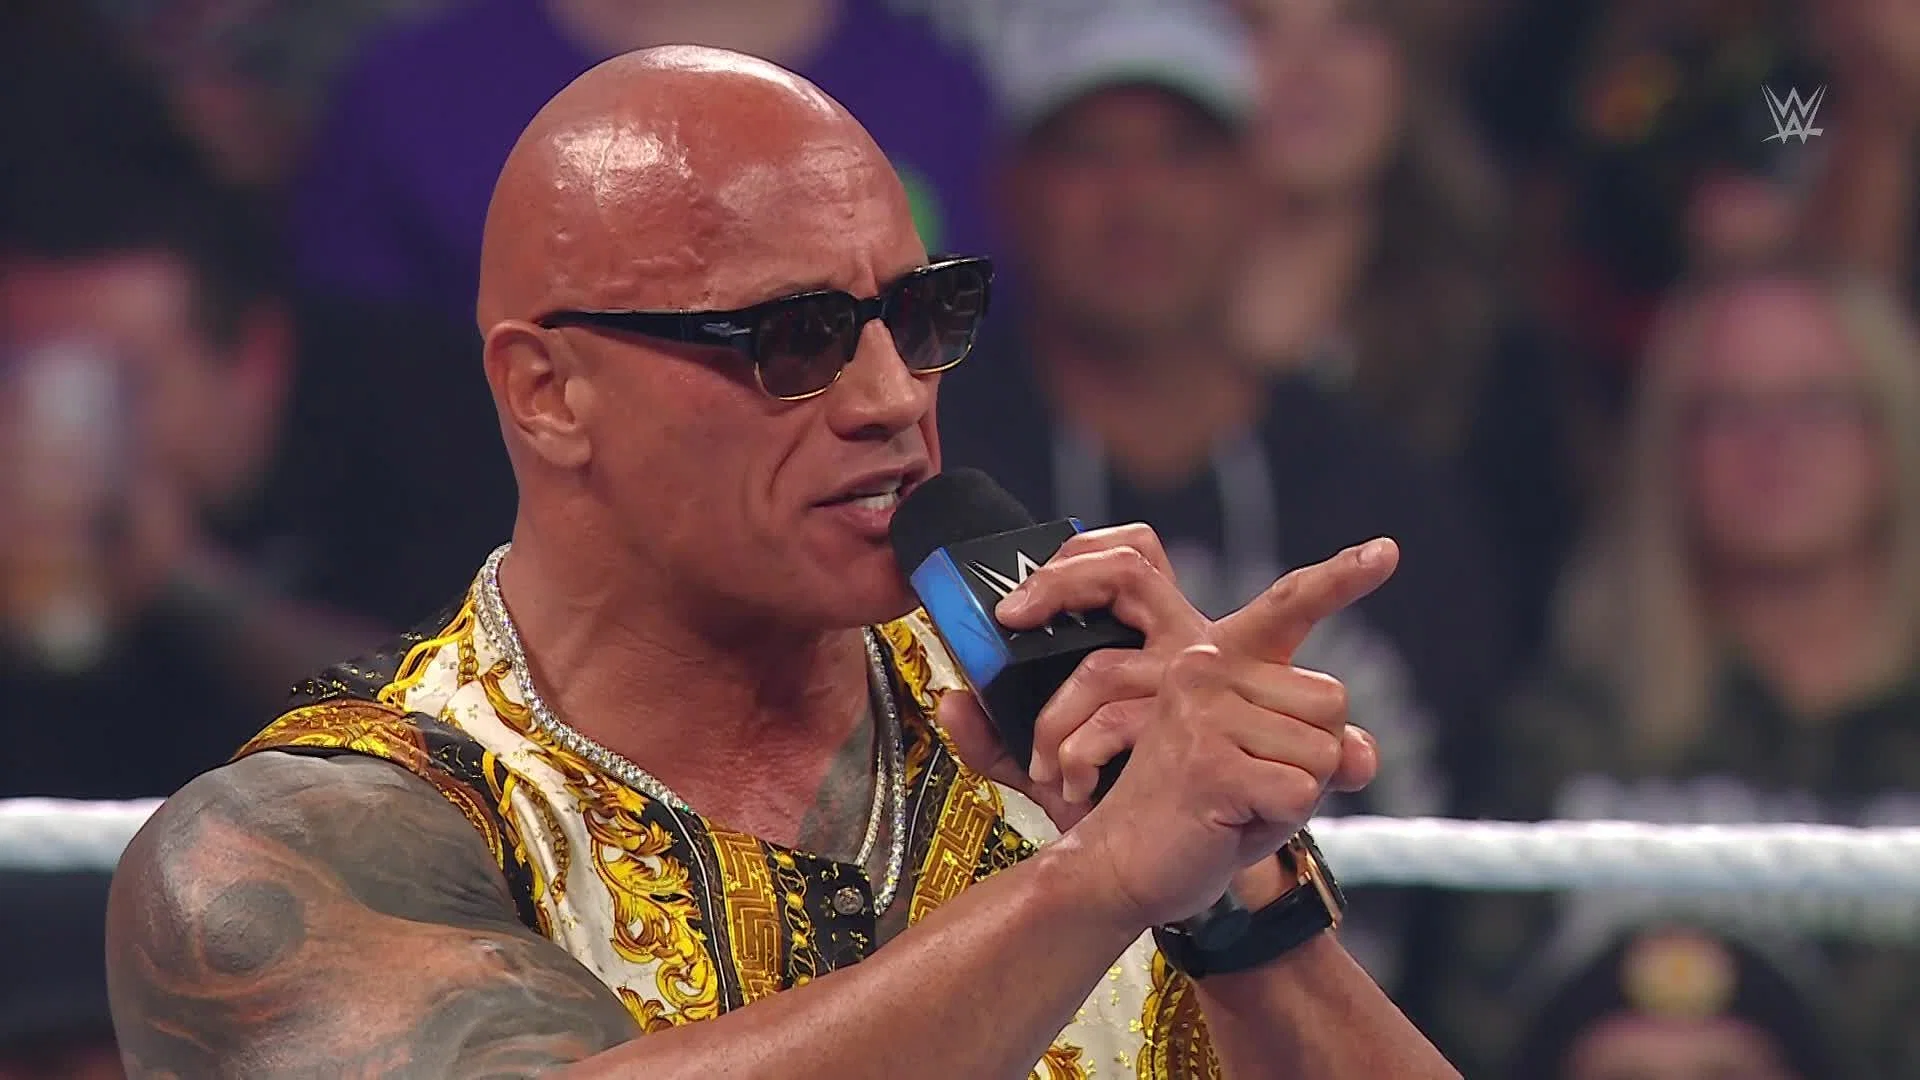 The Rock's Promo Controversy on SmackDown: A Deep Dive into WWE's Censorship Strategy